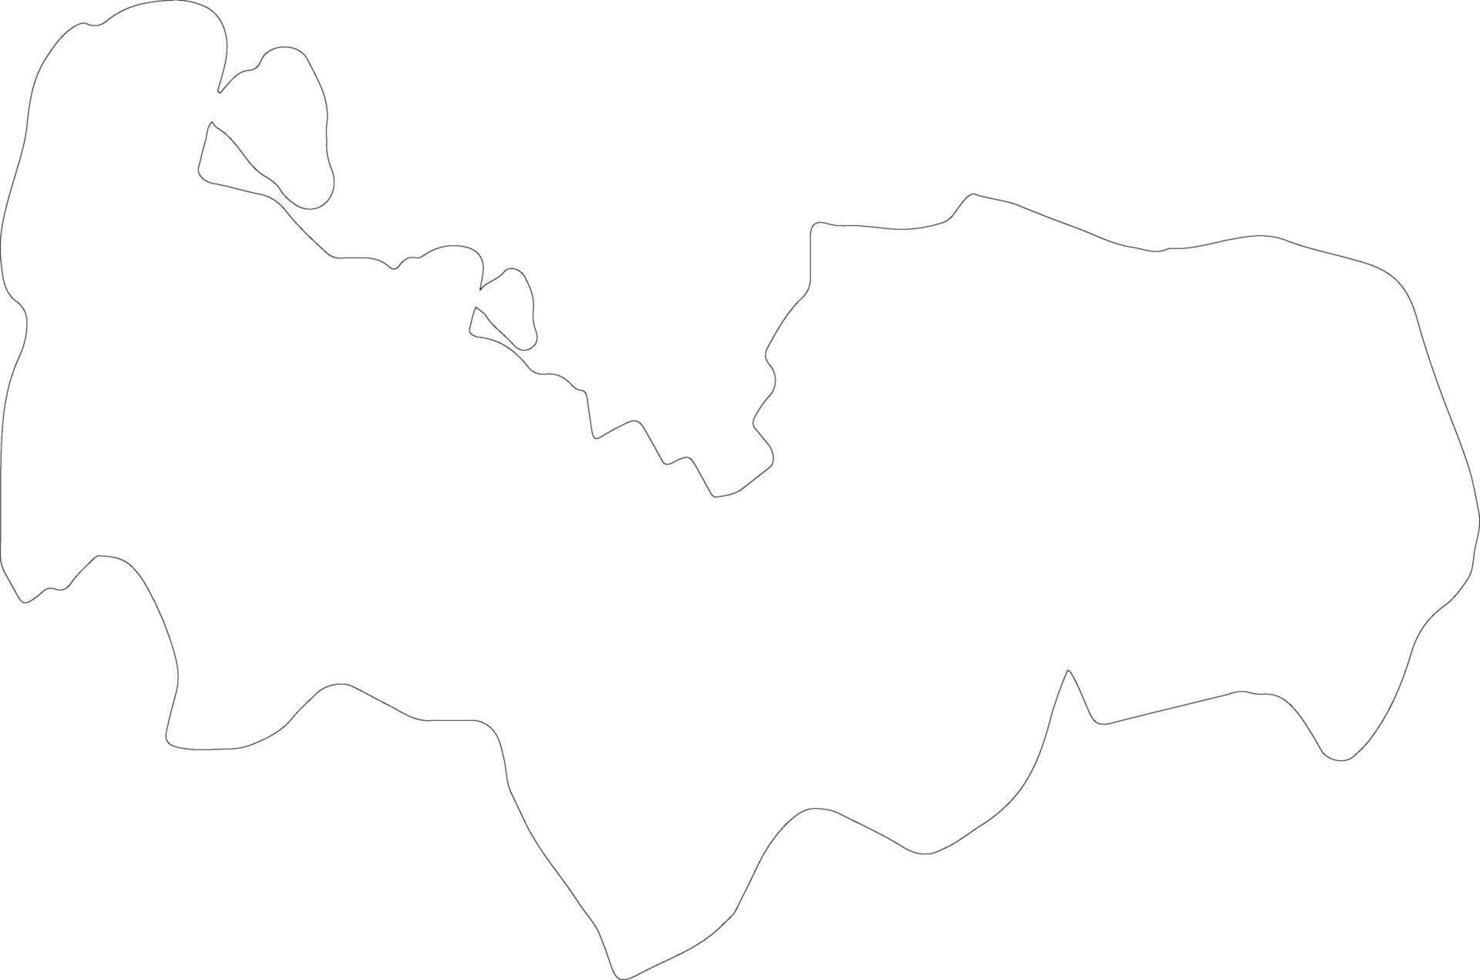 Pangasinan Philippines outline map vector